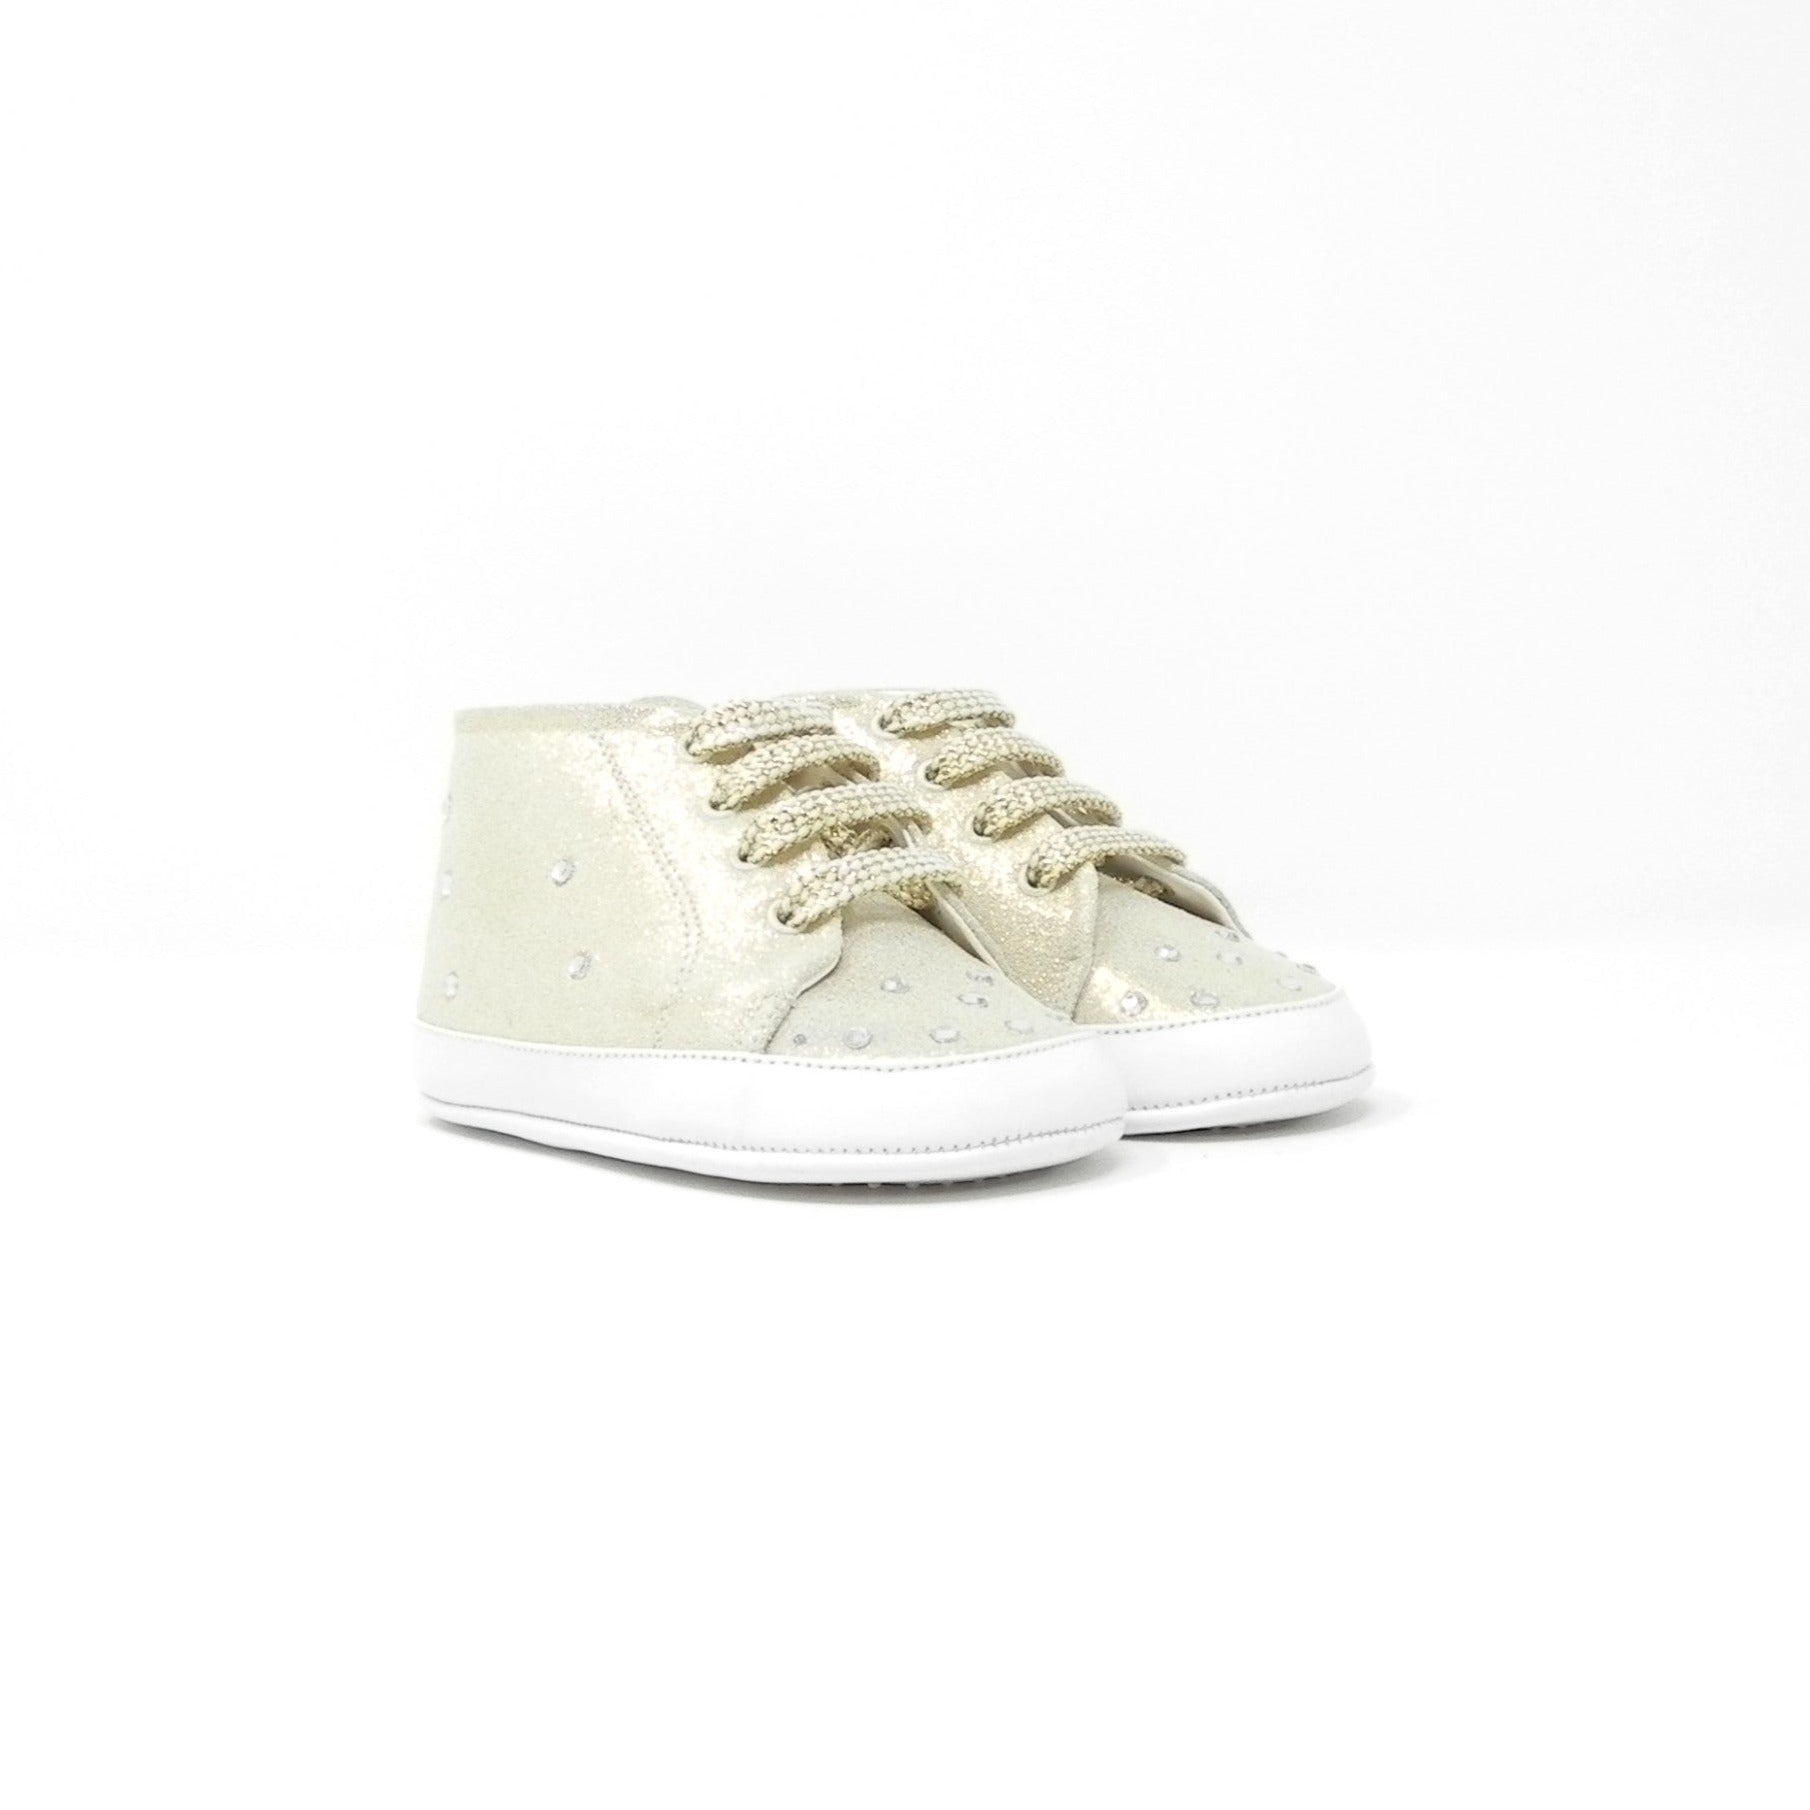 BABY CHICK - Sneakers culla